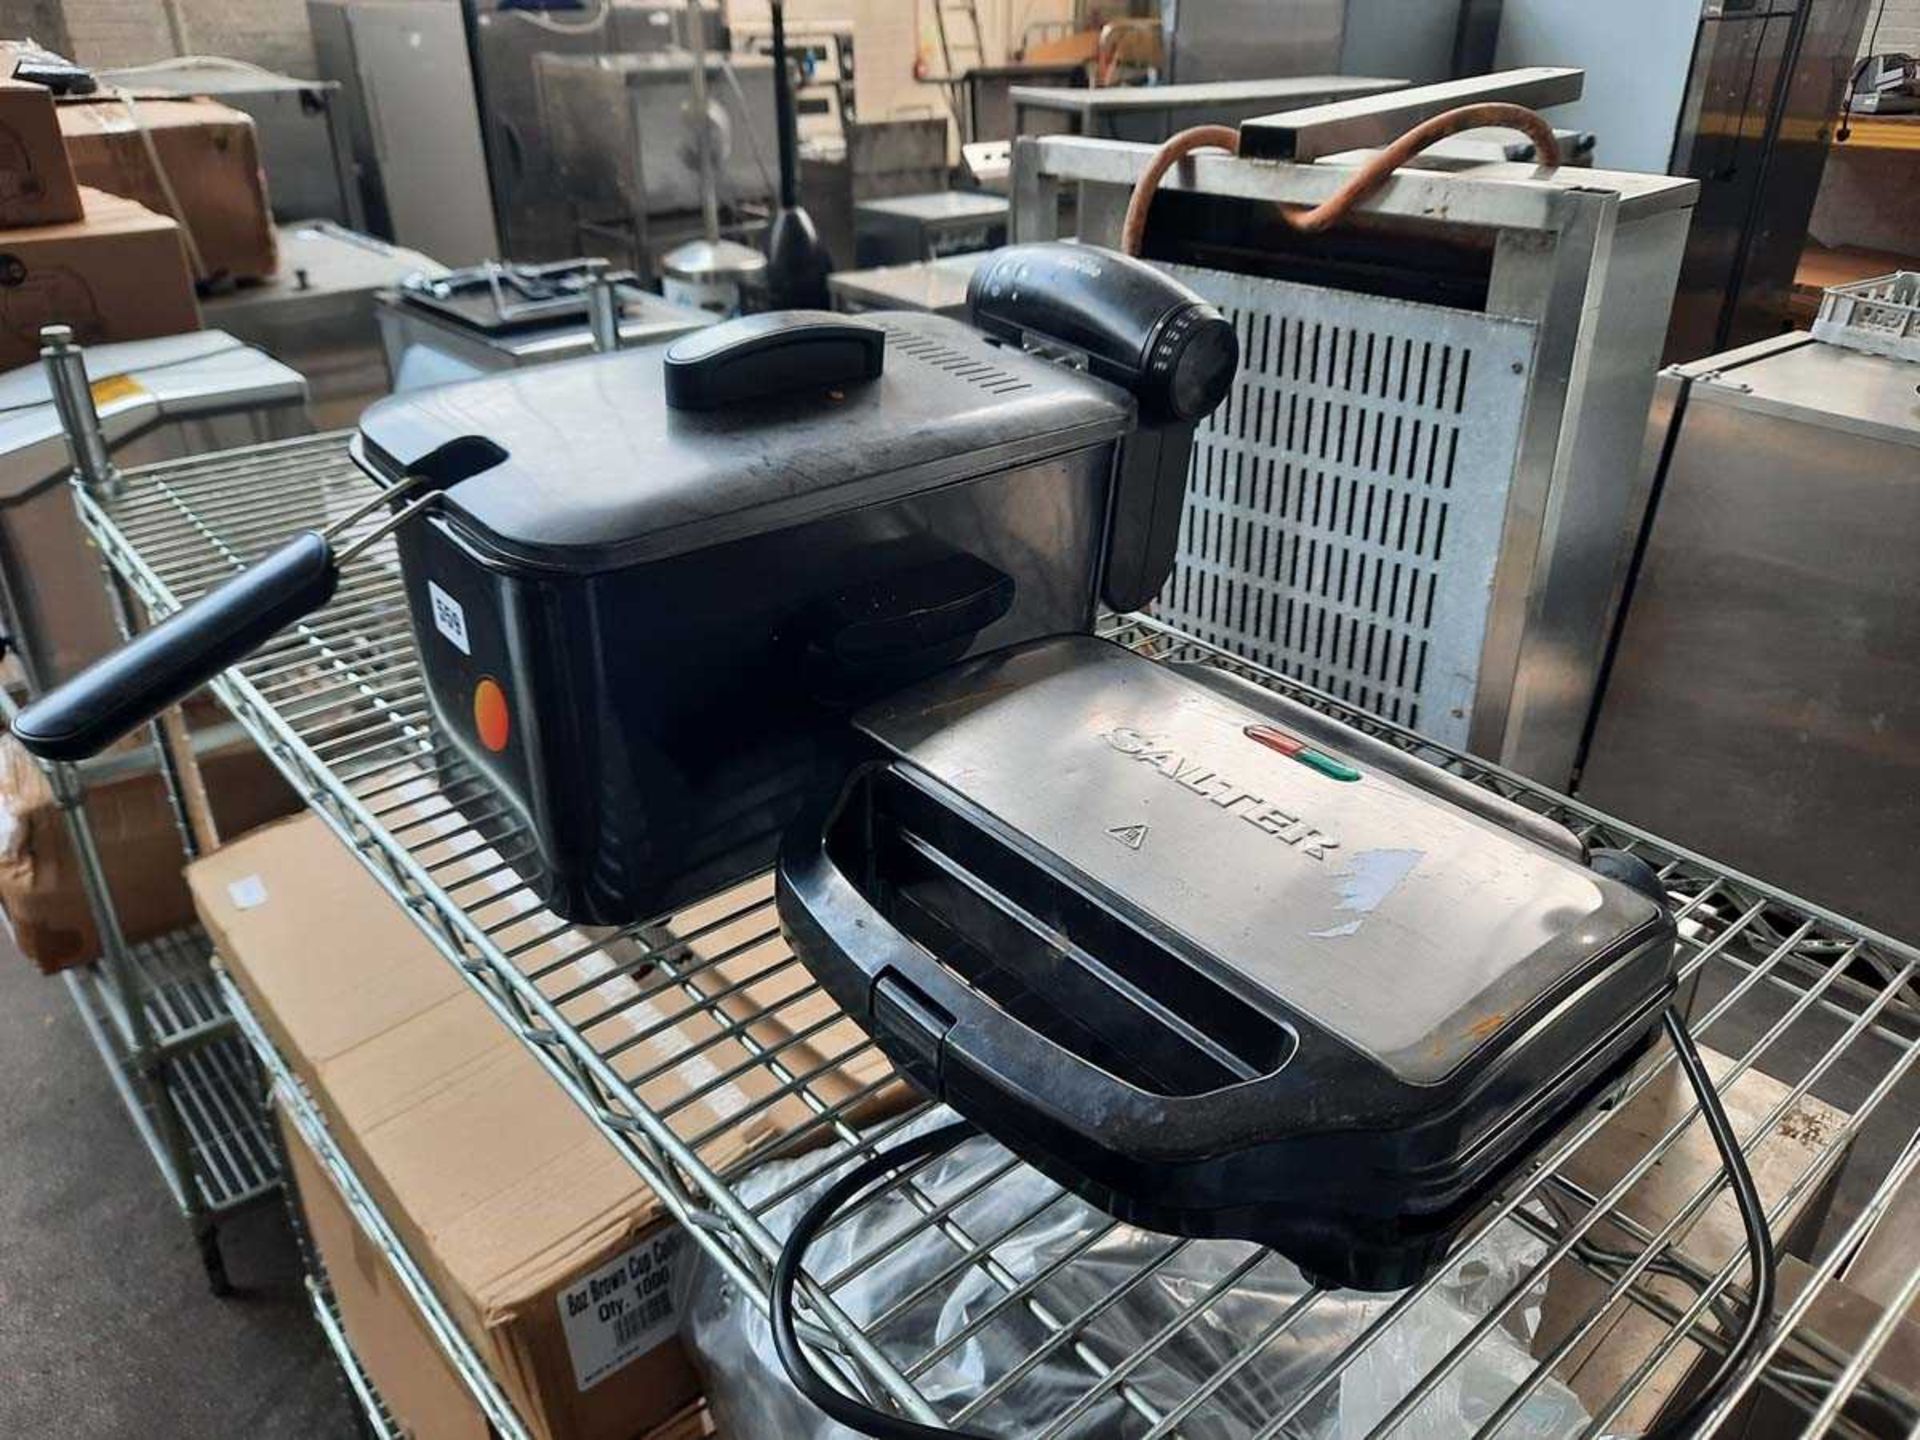 Domestic sandwich toaster and Breville fryer